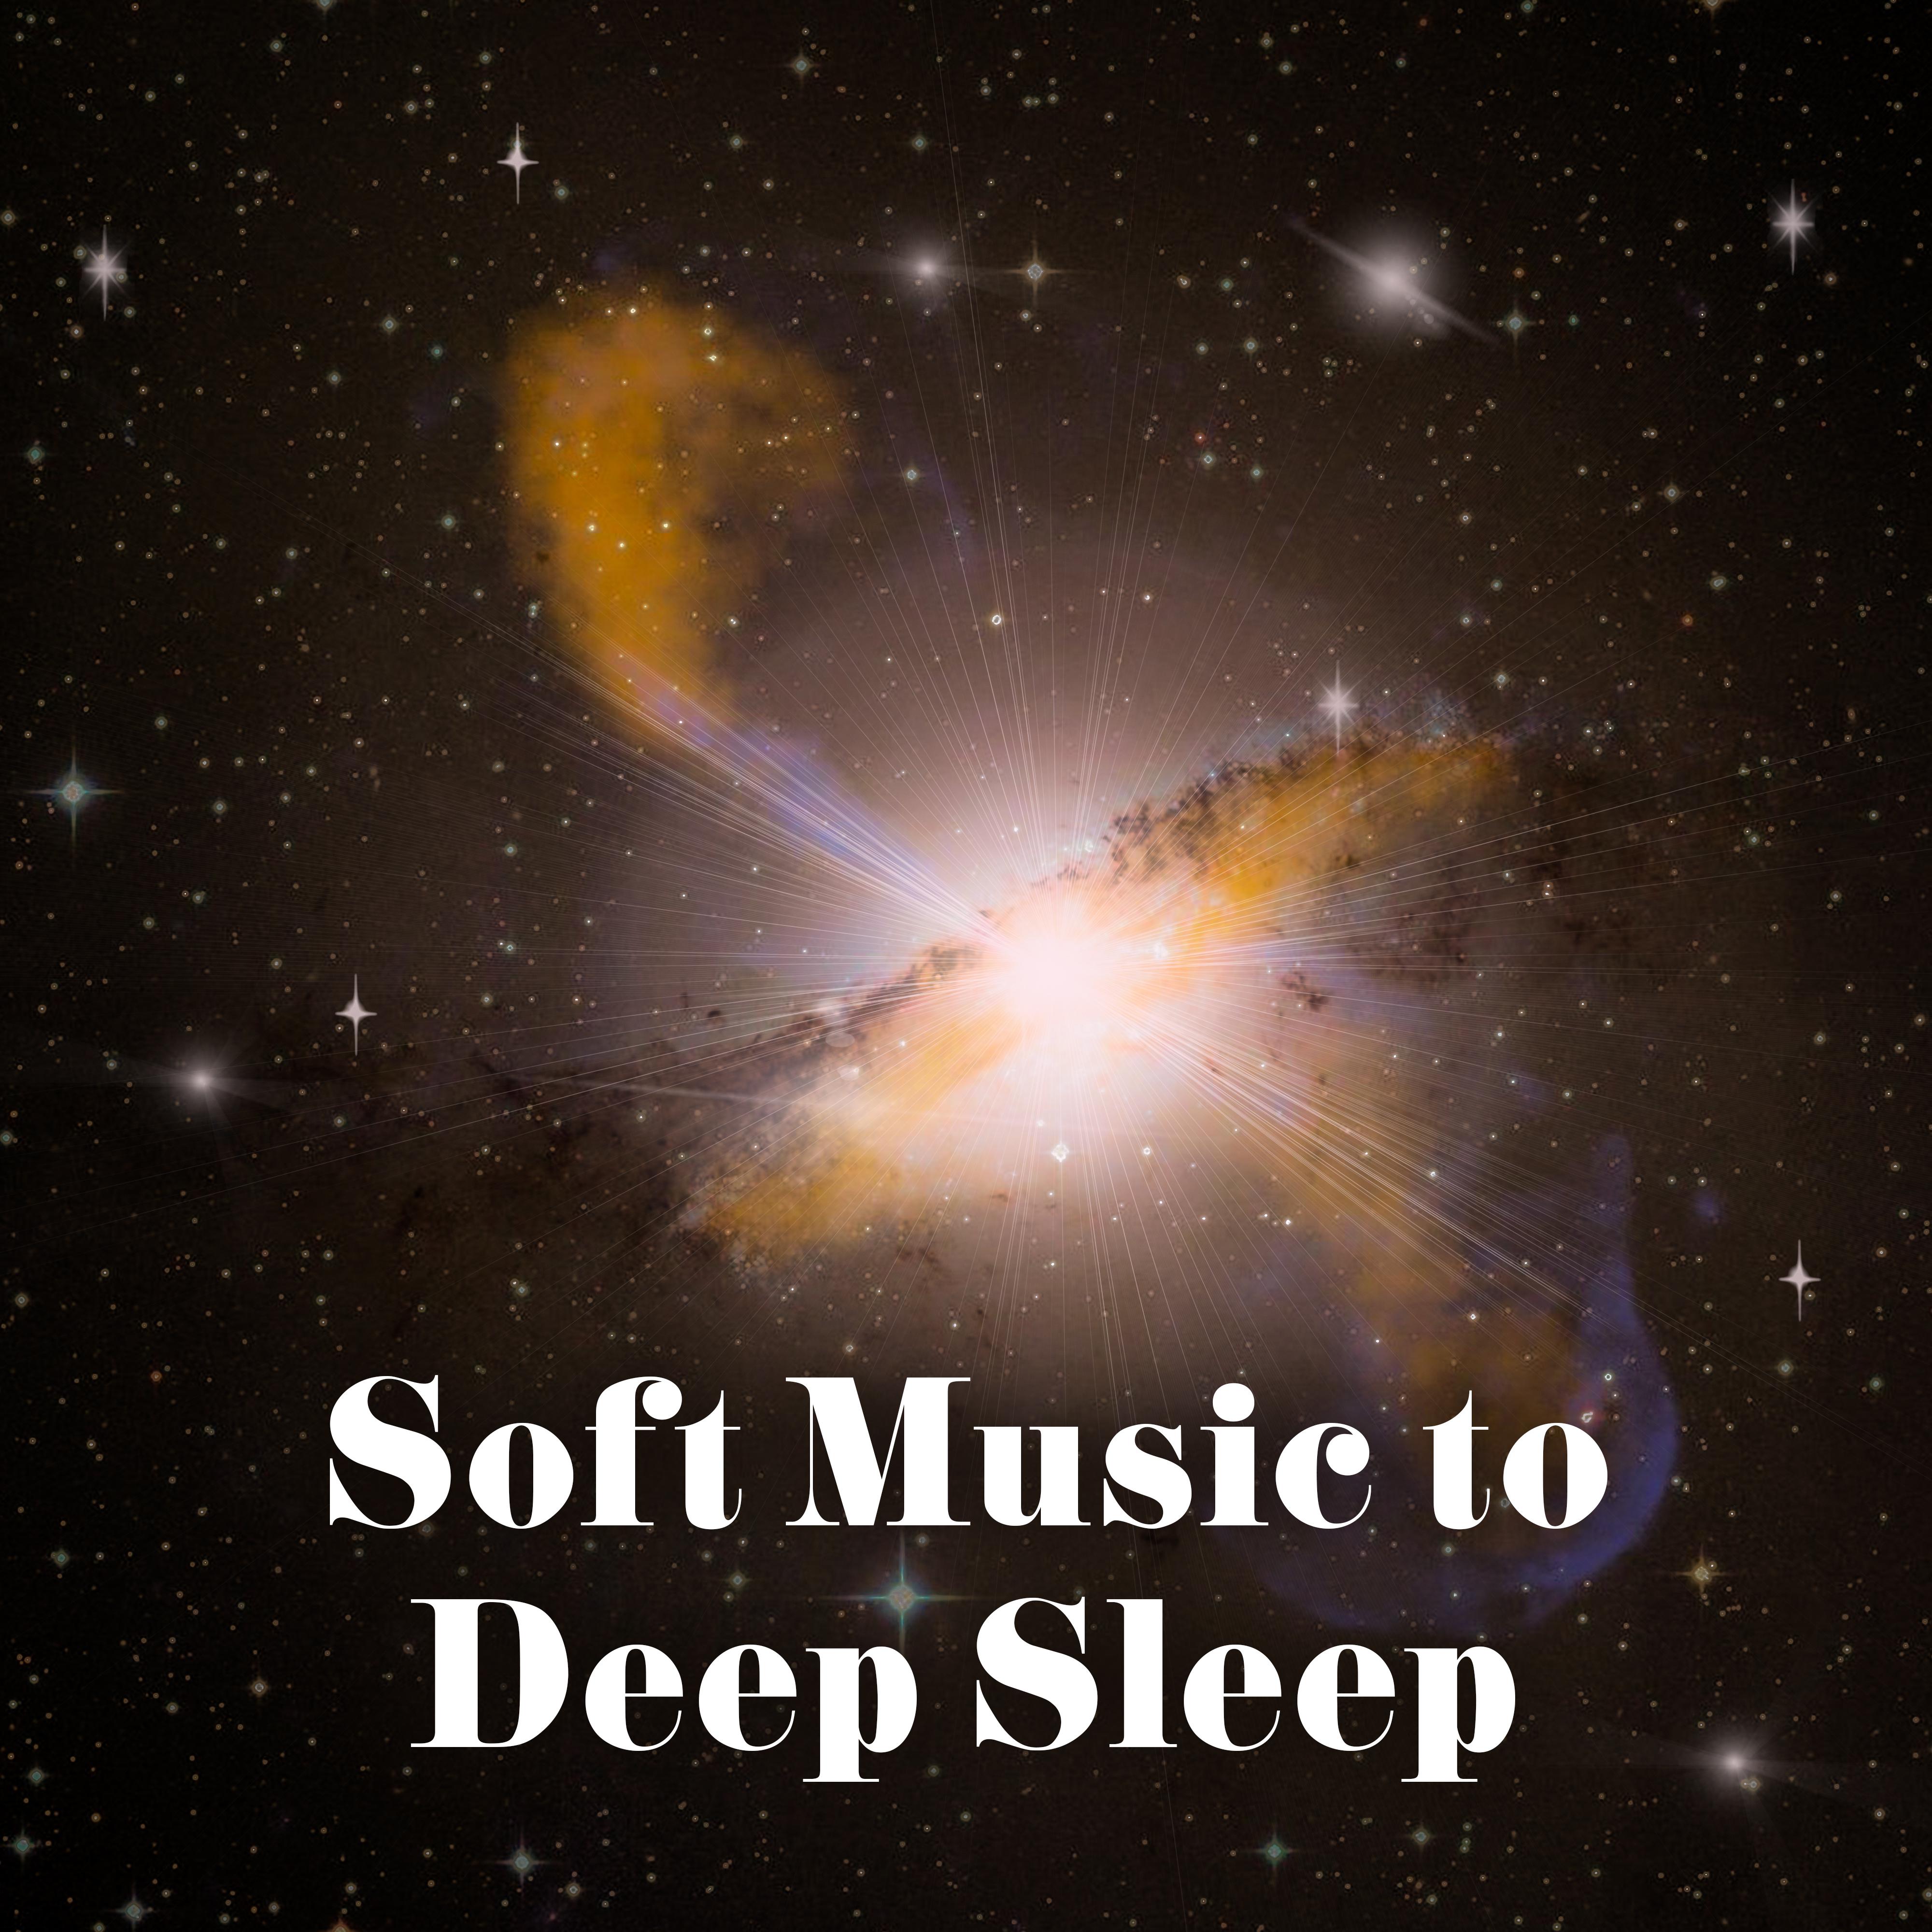 Soft Music to Deep Sleep  Relaxing New Age Music, Sleeping Hours, Stress Relief, Dreaming Time